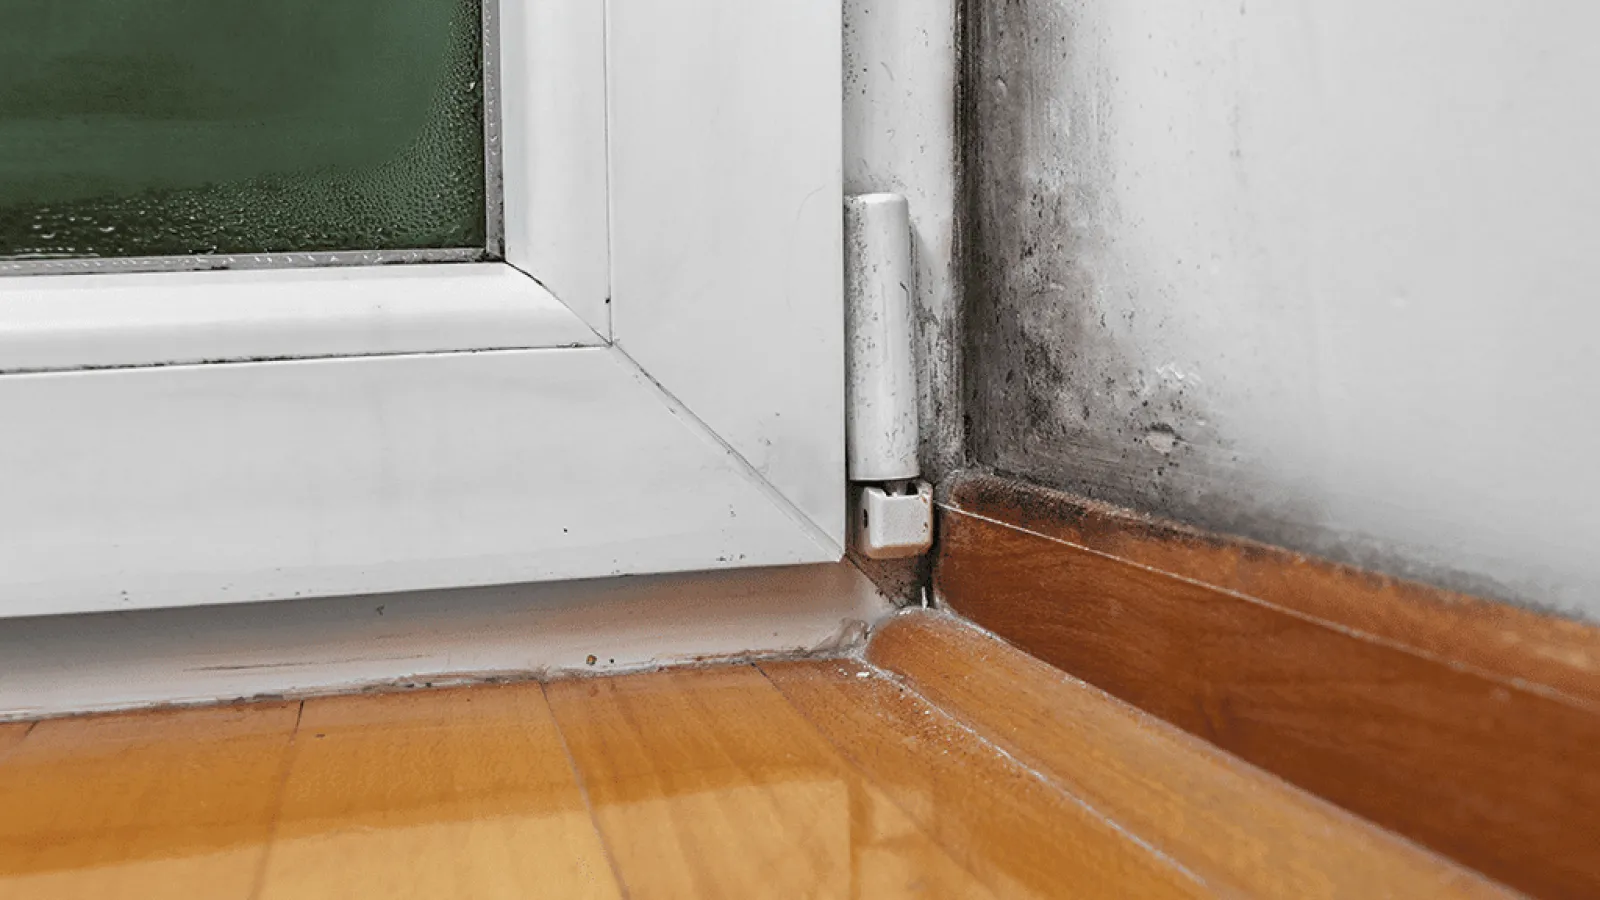 Have You Spotted Mold In Your Home or Near Your HVAC System?